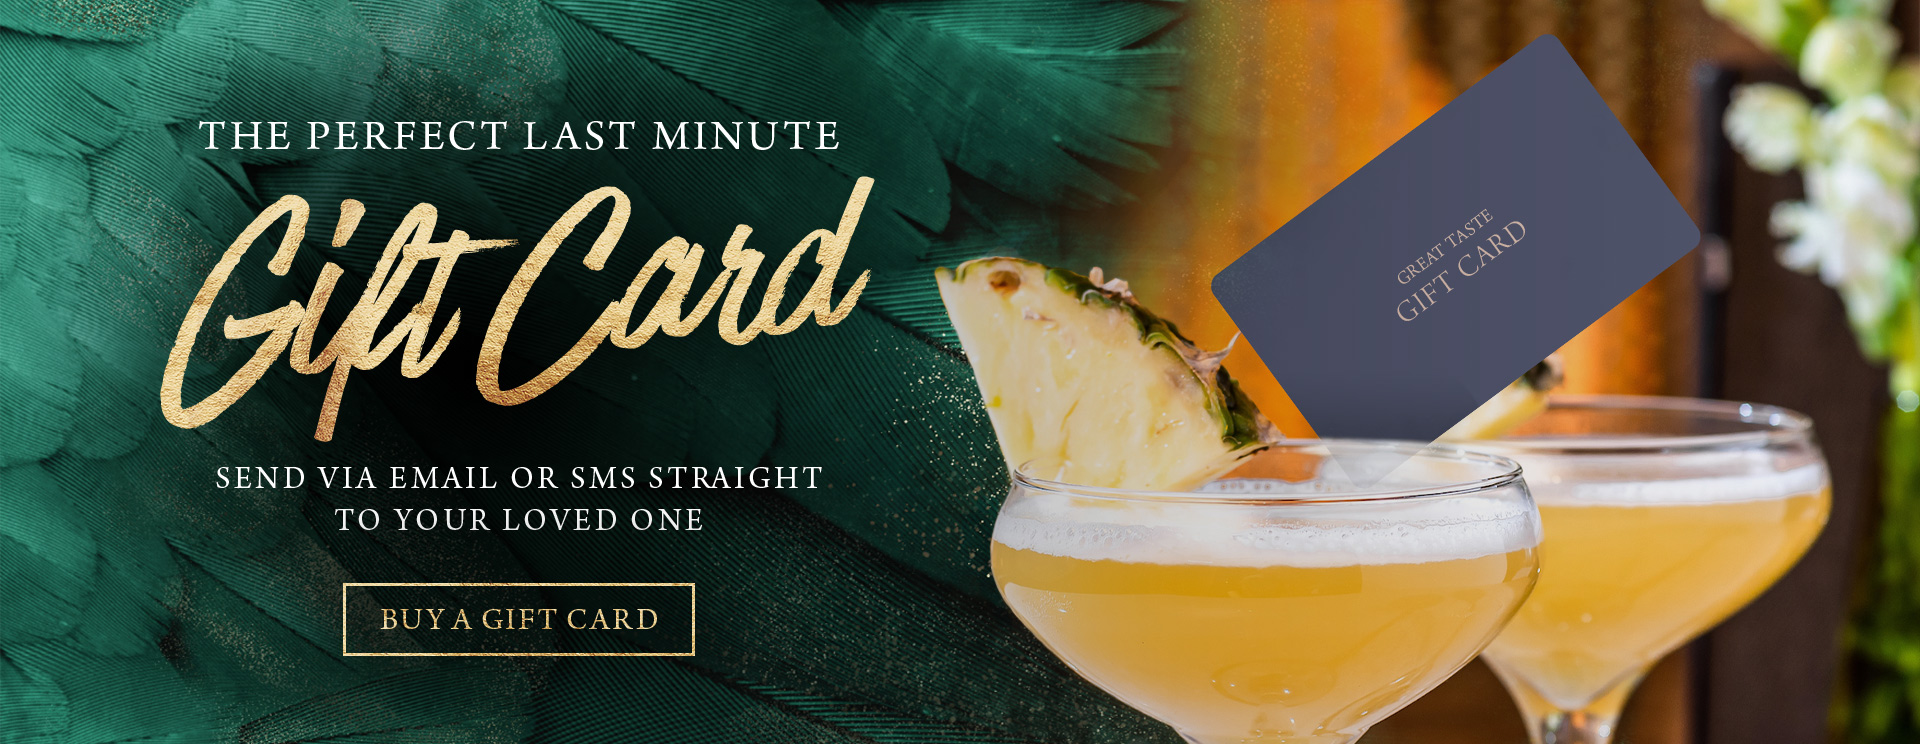 Give the gift of a gift card at The Hand & Sceptre